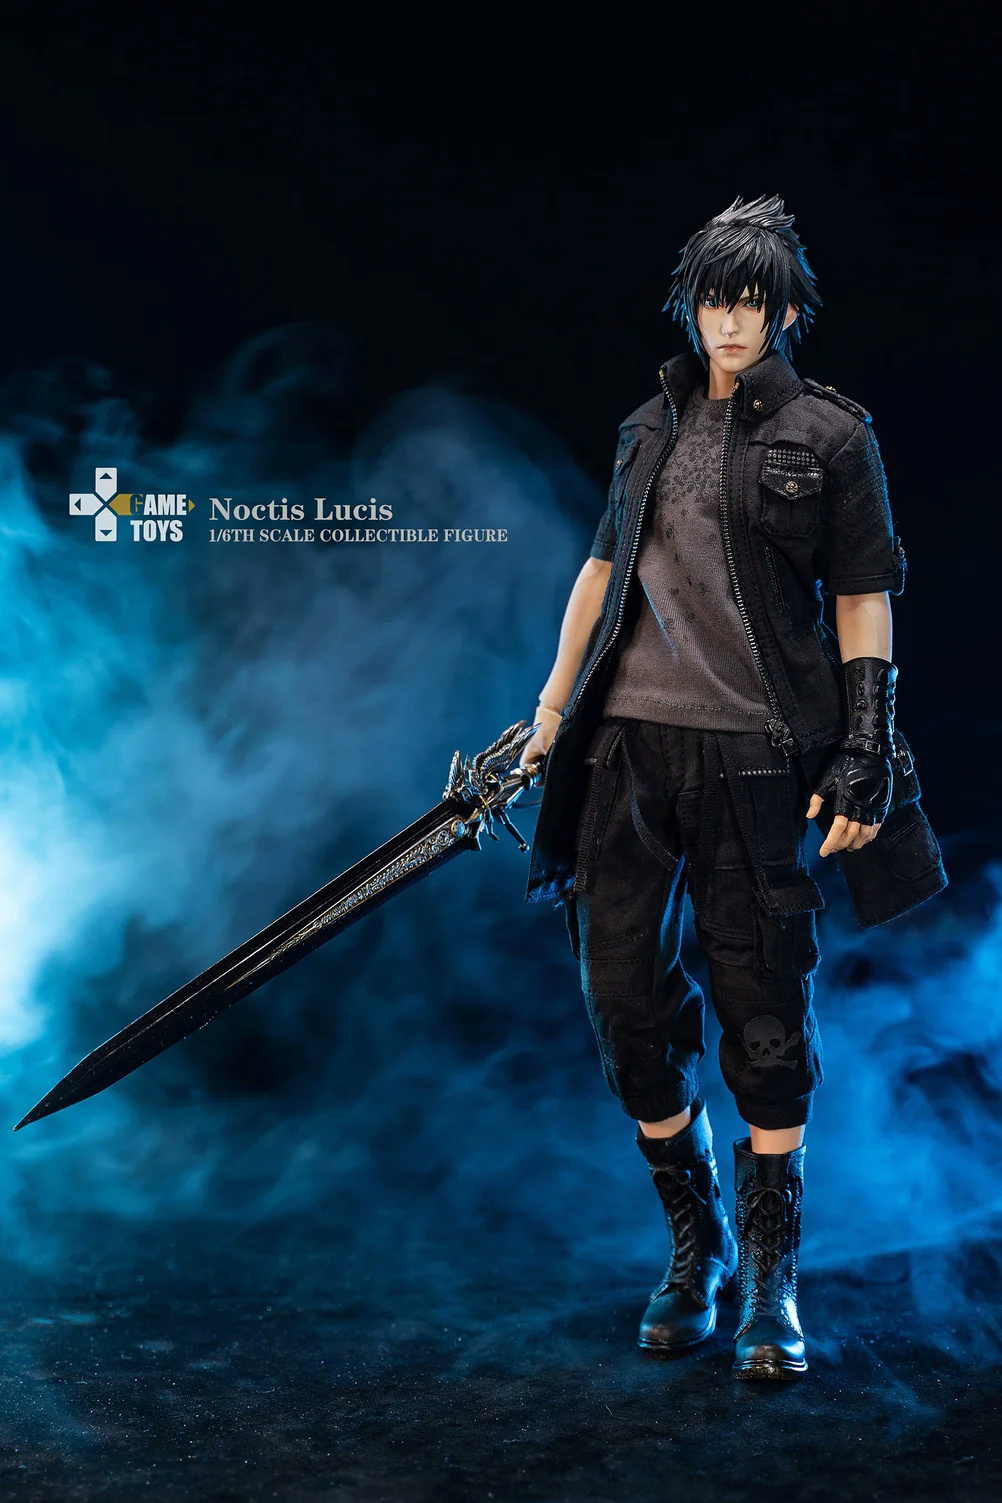 NEW PRODUCT: Gametoys Noctis Lucis, additional accessories, and throne 15_web10